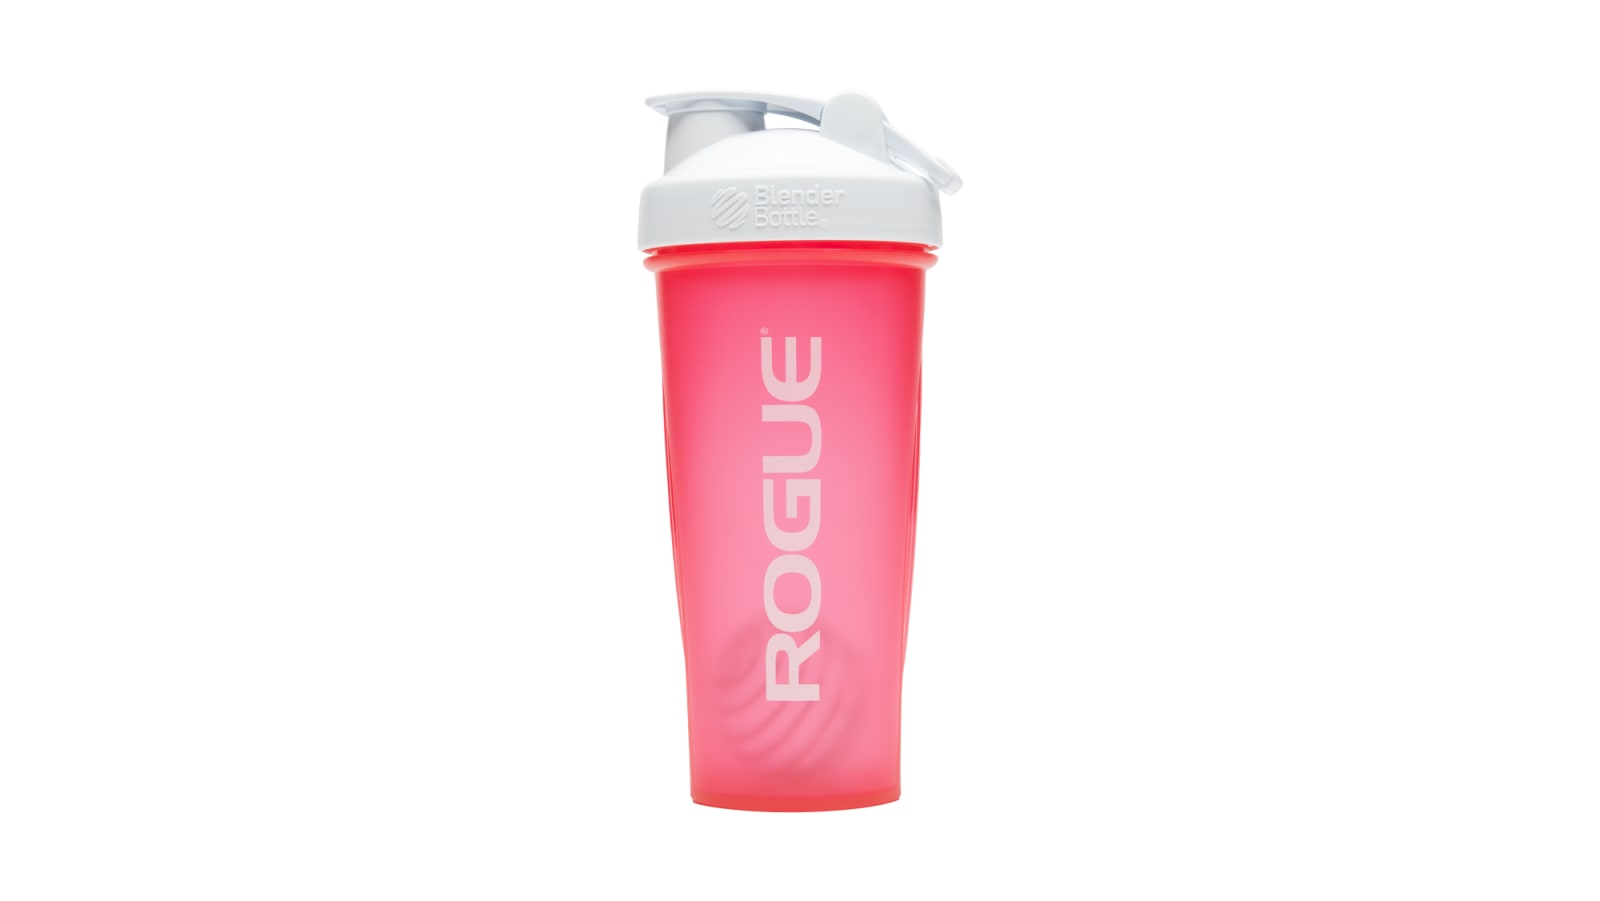 https://assets.roguefitness.com/f_auto,q_auto,c_limit,w_1600,b_rgb:ffffff/catalog/Gear%20and%20Accessories/Accessories/Shakers%20and%20Bottles/BBPINK/BB0032-H_zn1fjn.png